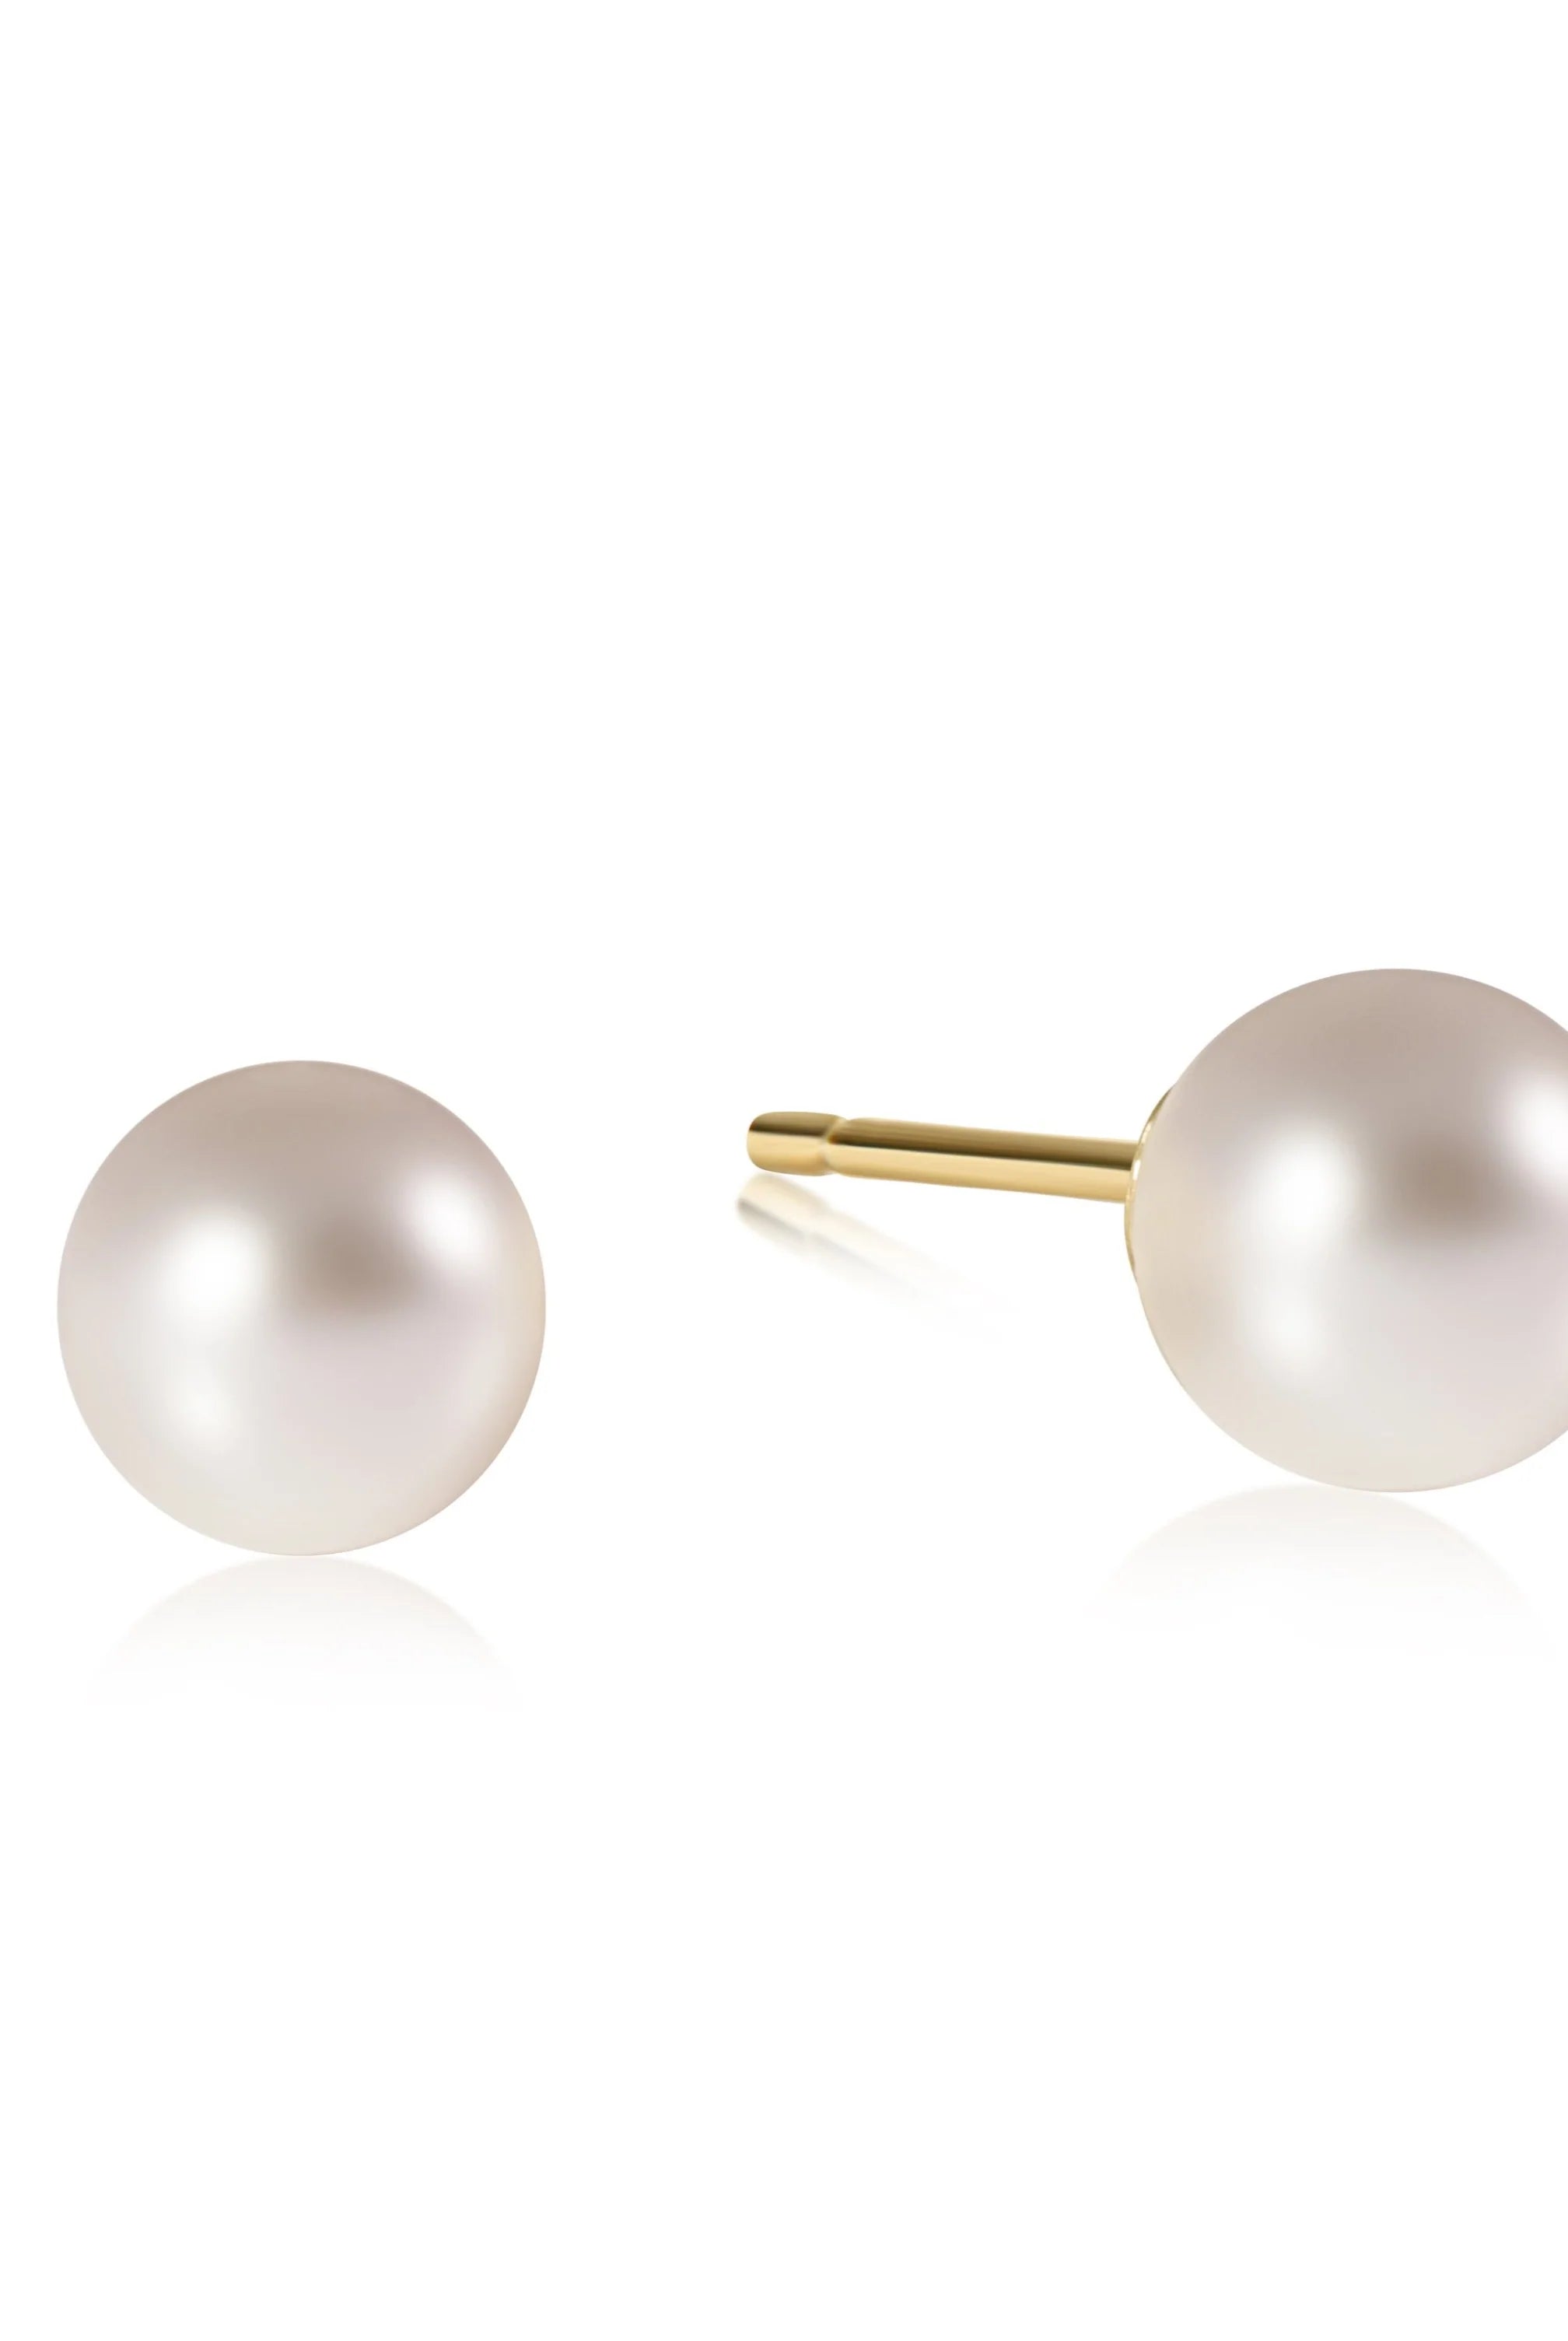 Classic 8mm Pearl Ball Stud-Earrings-eNewton-The Lovely Closet, Women's Fashion Boutique in Alexandria, KY